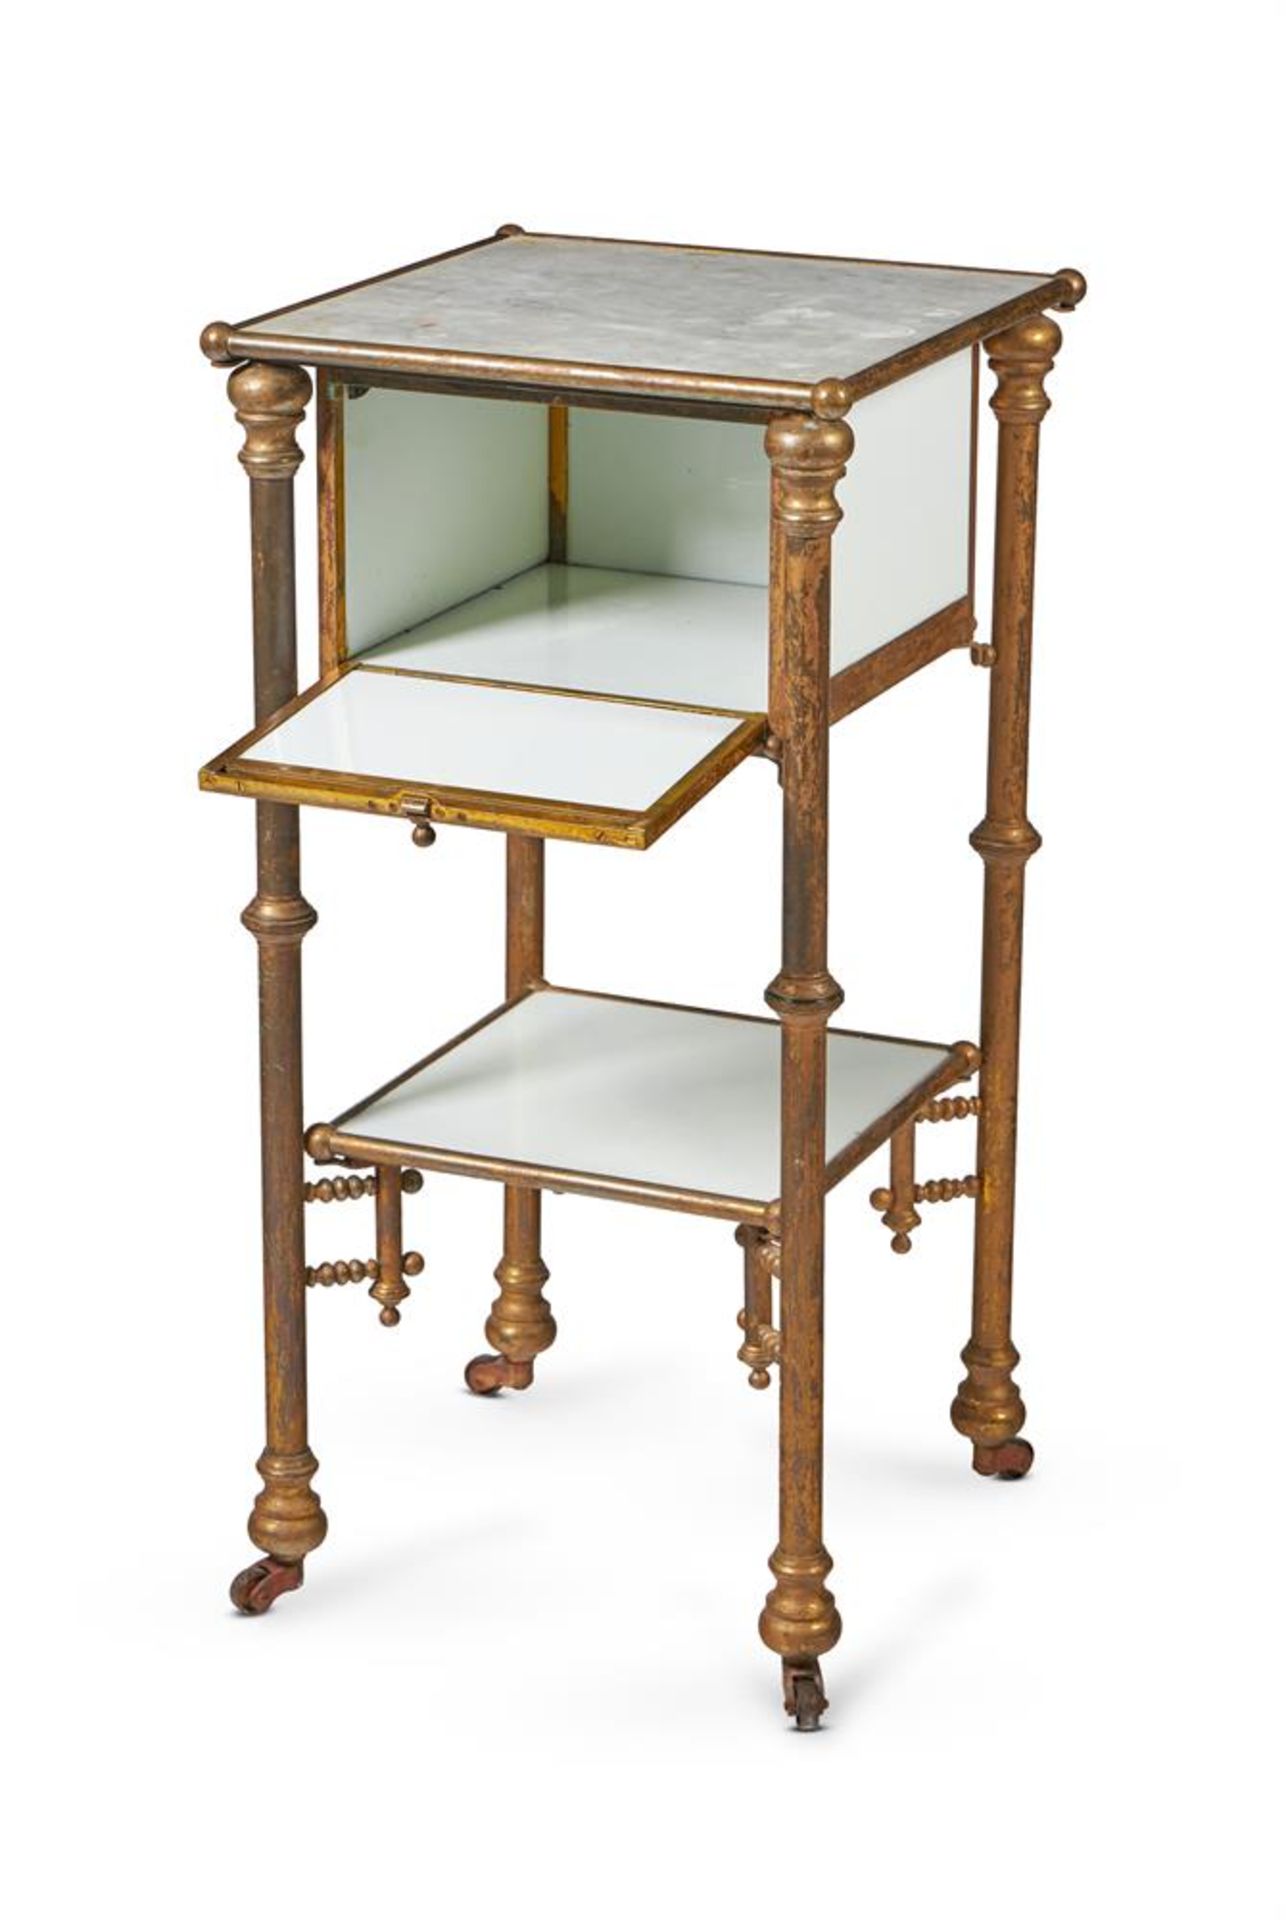 A BRASS, MARBLE AND WHITE GLASS WASHSTAND, LATE 19TH CENTURY - Image 2 of 2